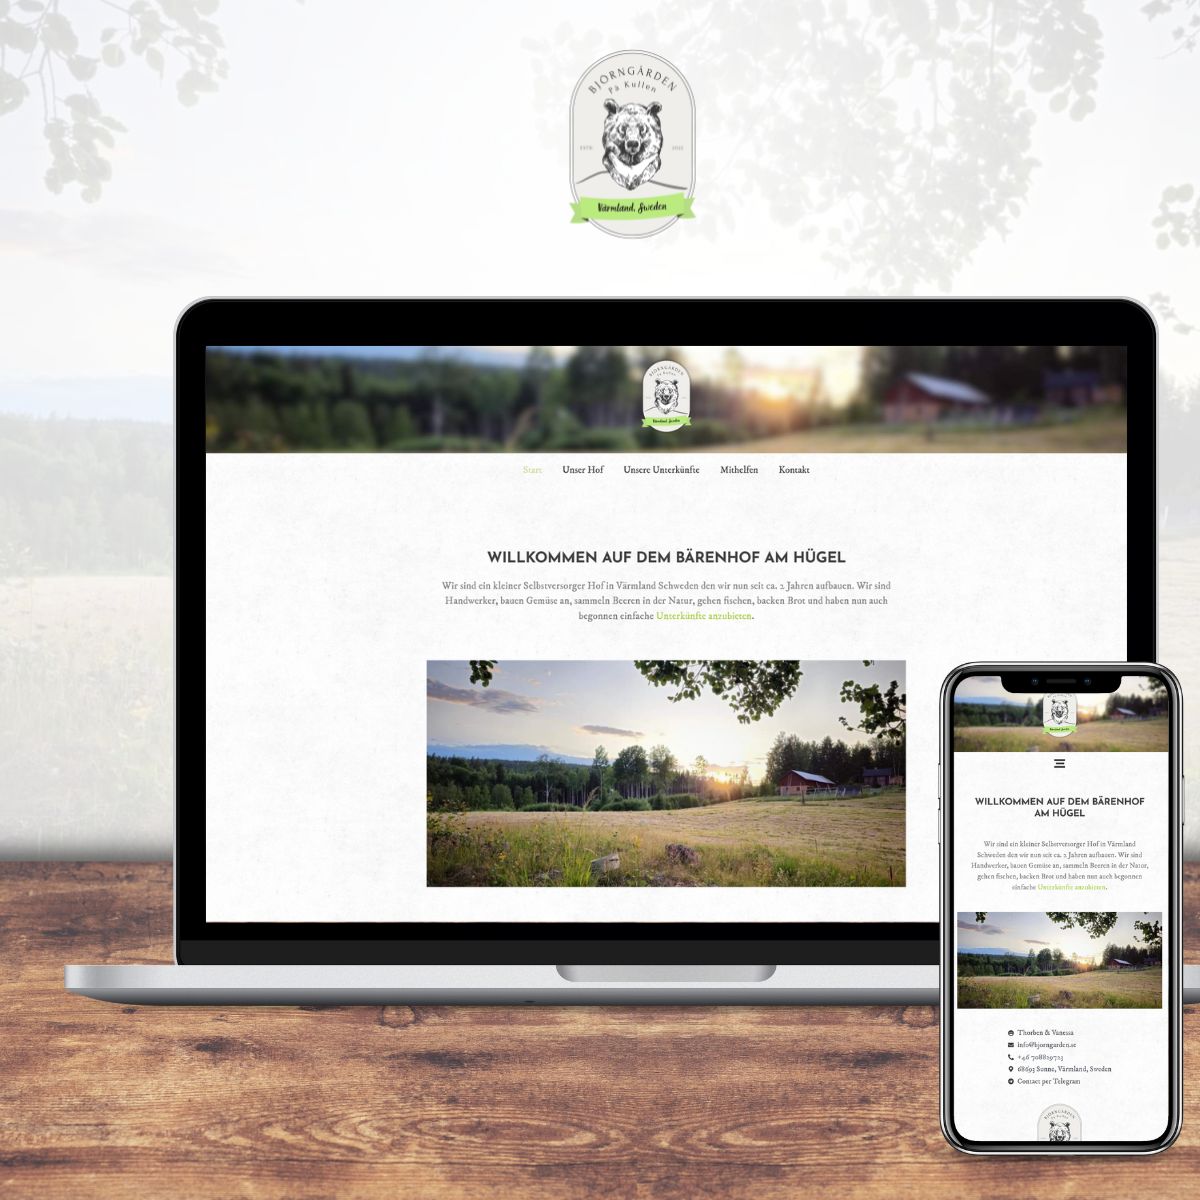 Webdesign for an eco farm in sweden